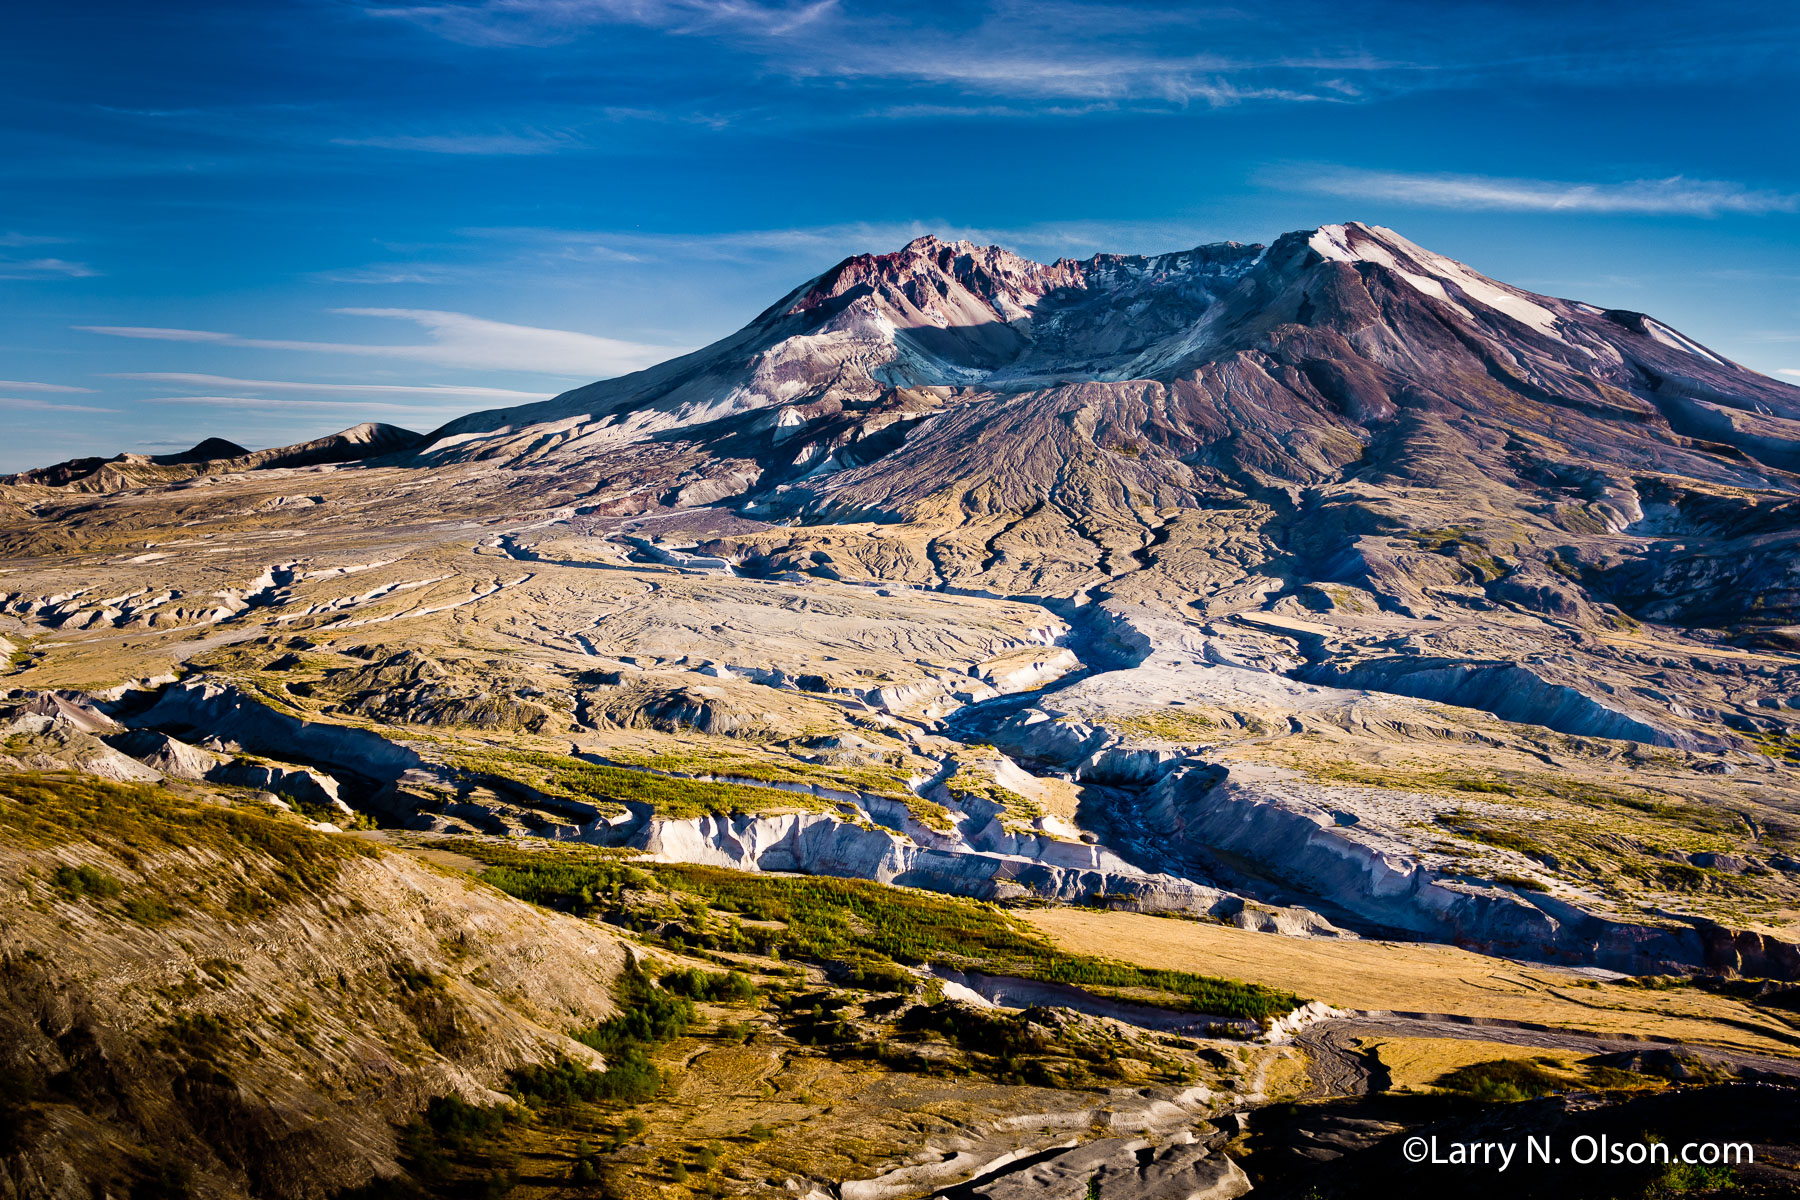 Mount St. Helens National Volcanic Mounument #1, WA | The devastated flanks of the mountain and crater show spectacular erosion patterns and vegetative life returning.